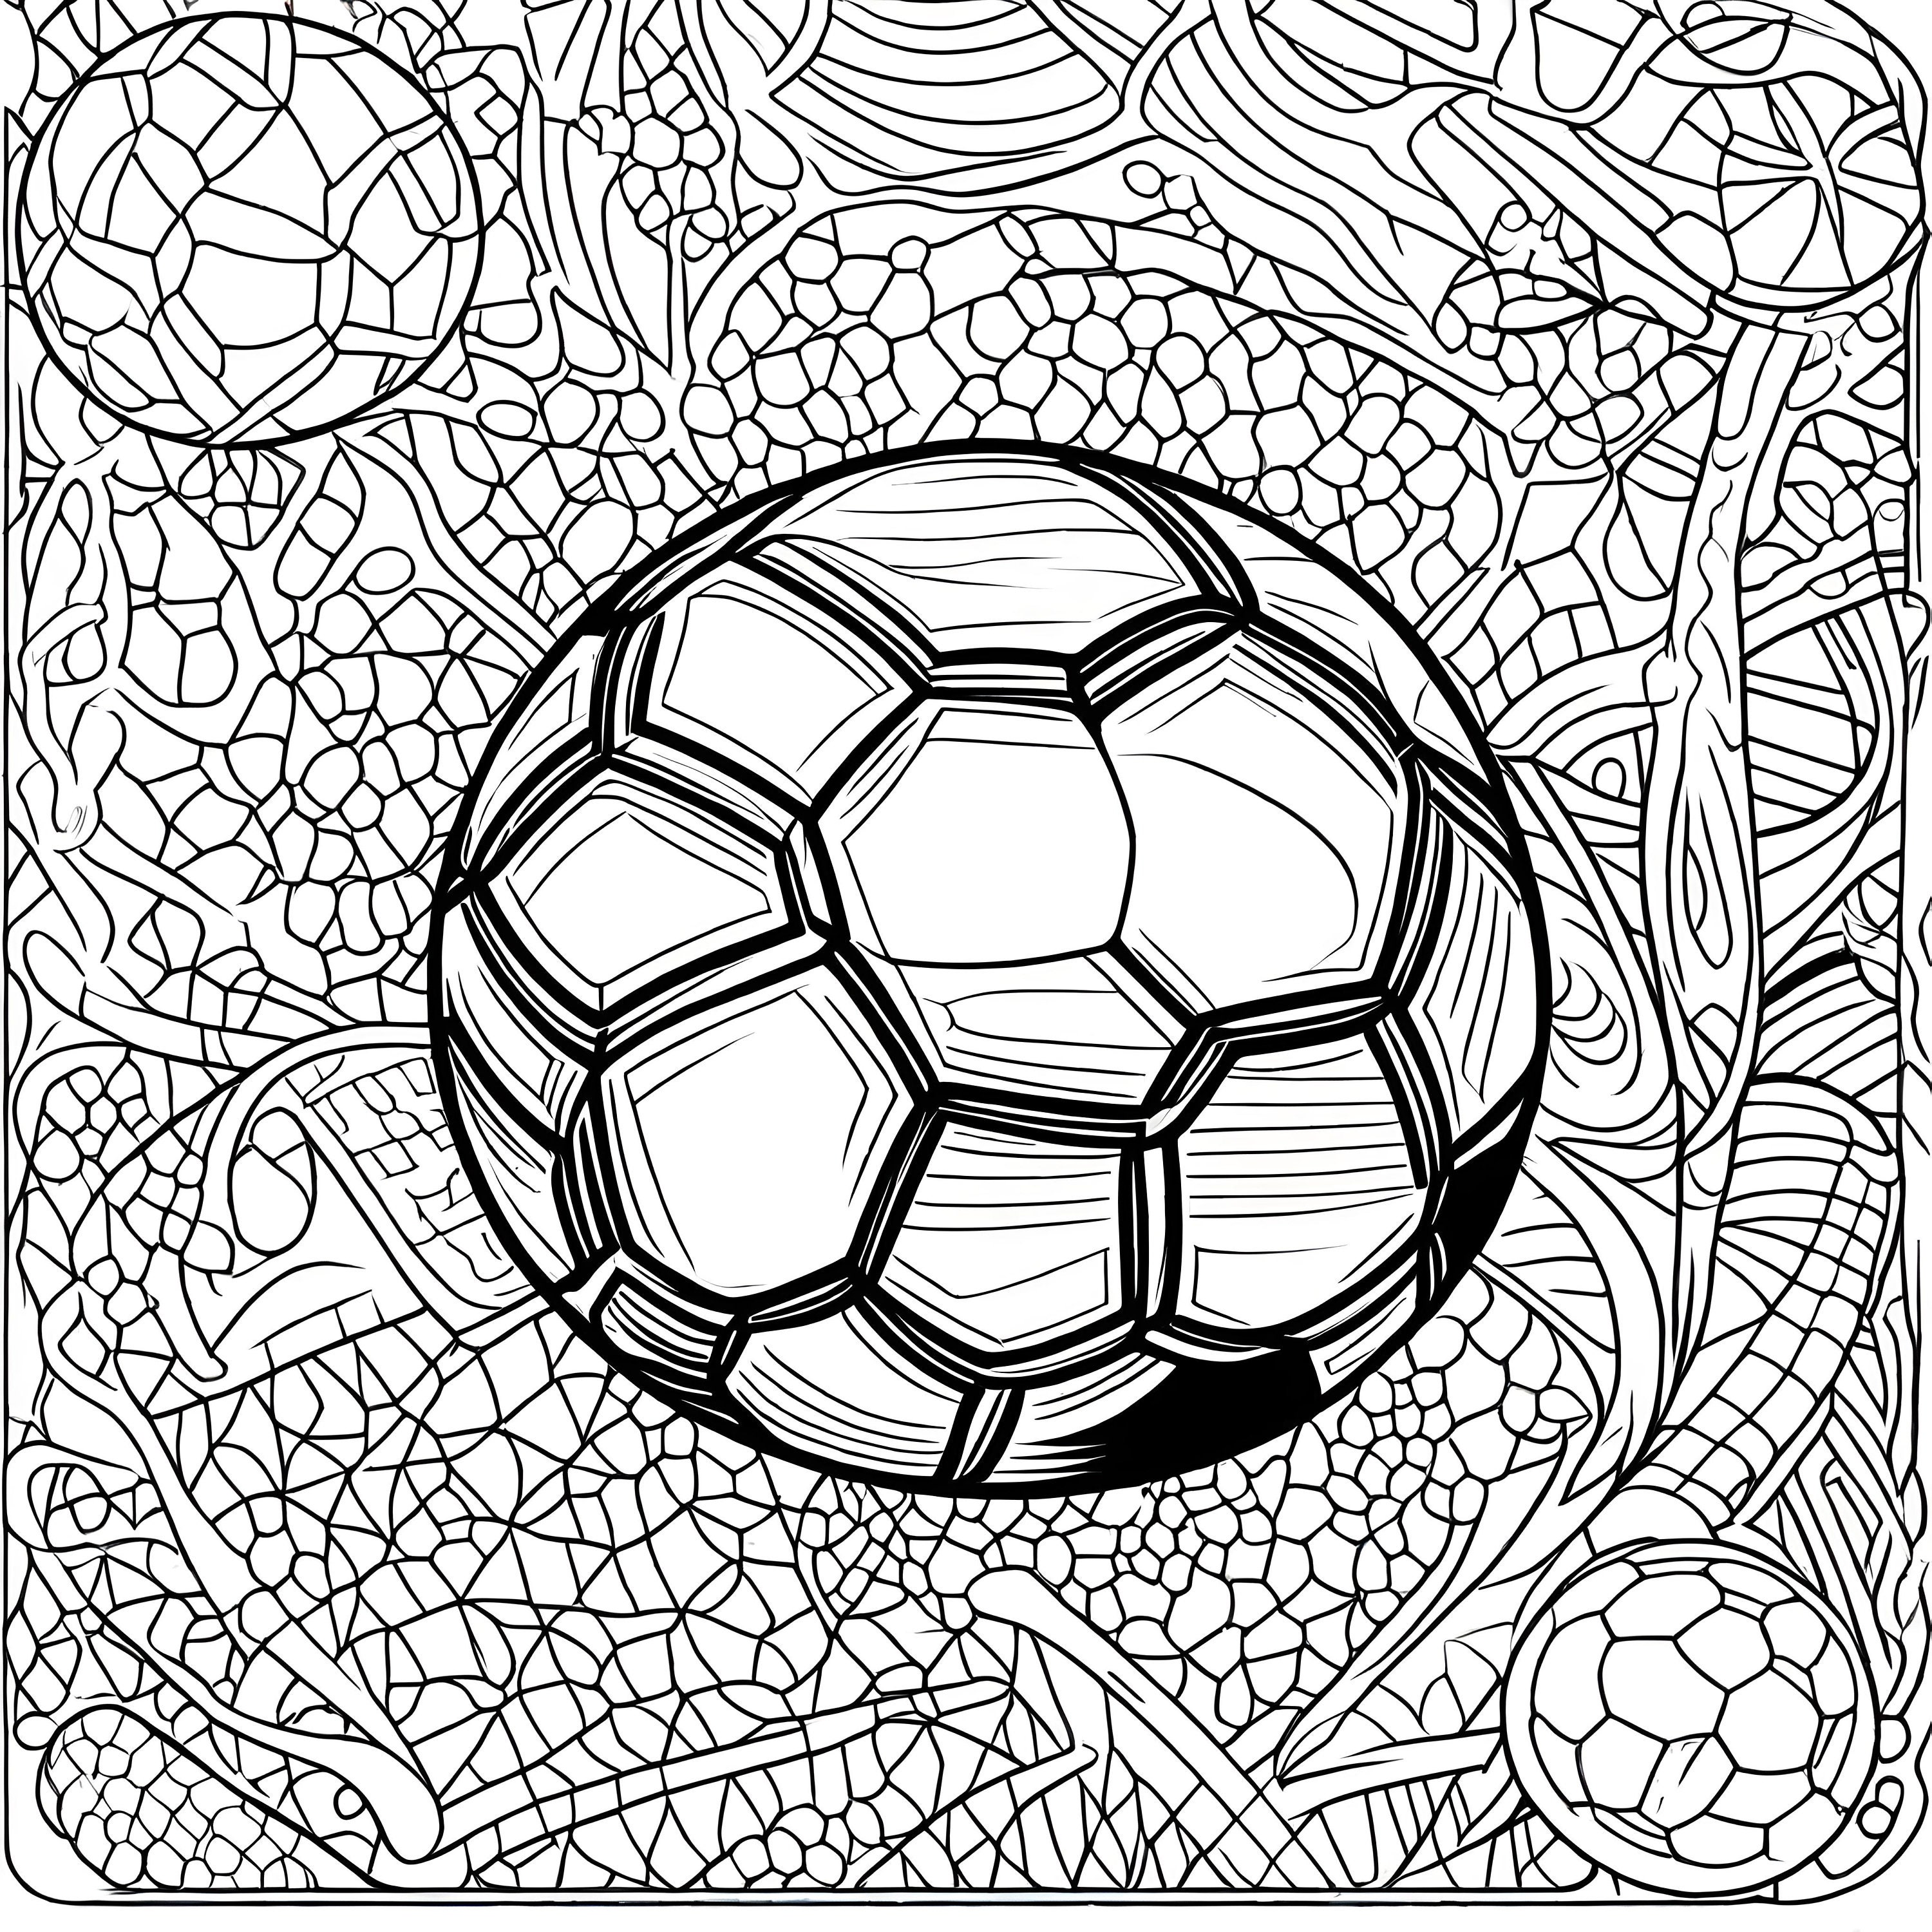 Soccer Coloring Pages 19 Pages Lionel Messi, Cristiano Ronaldo, Neymar ...